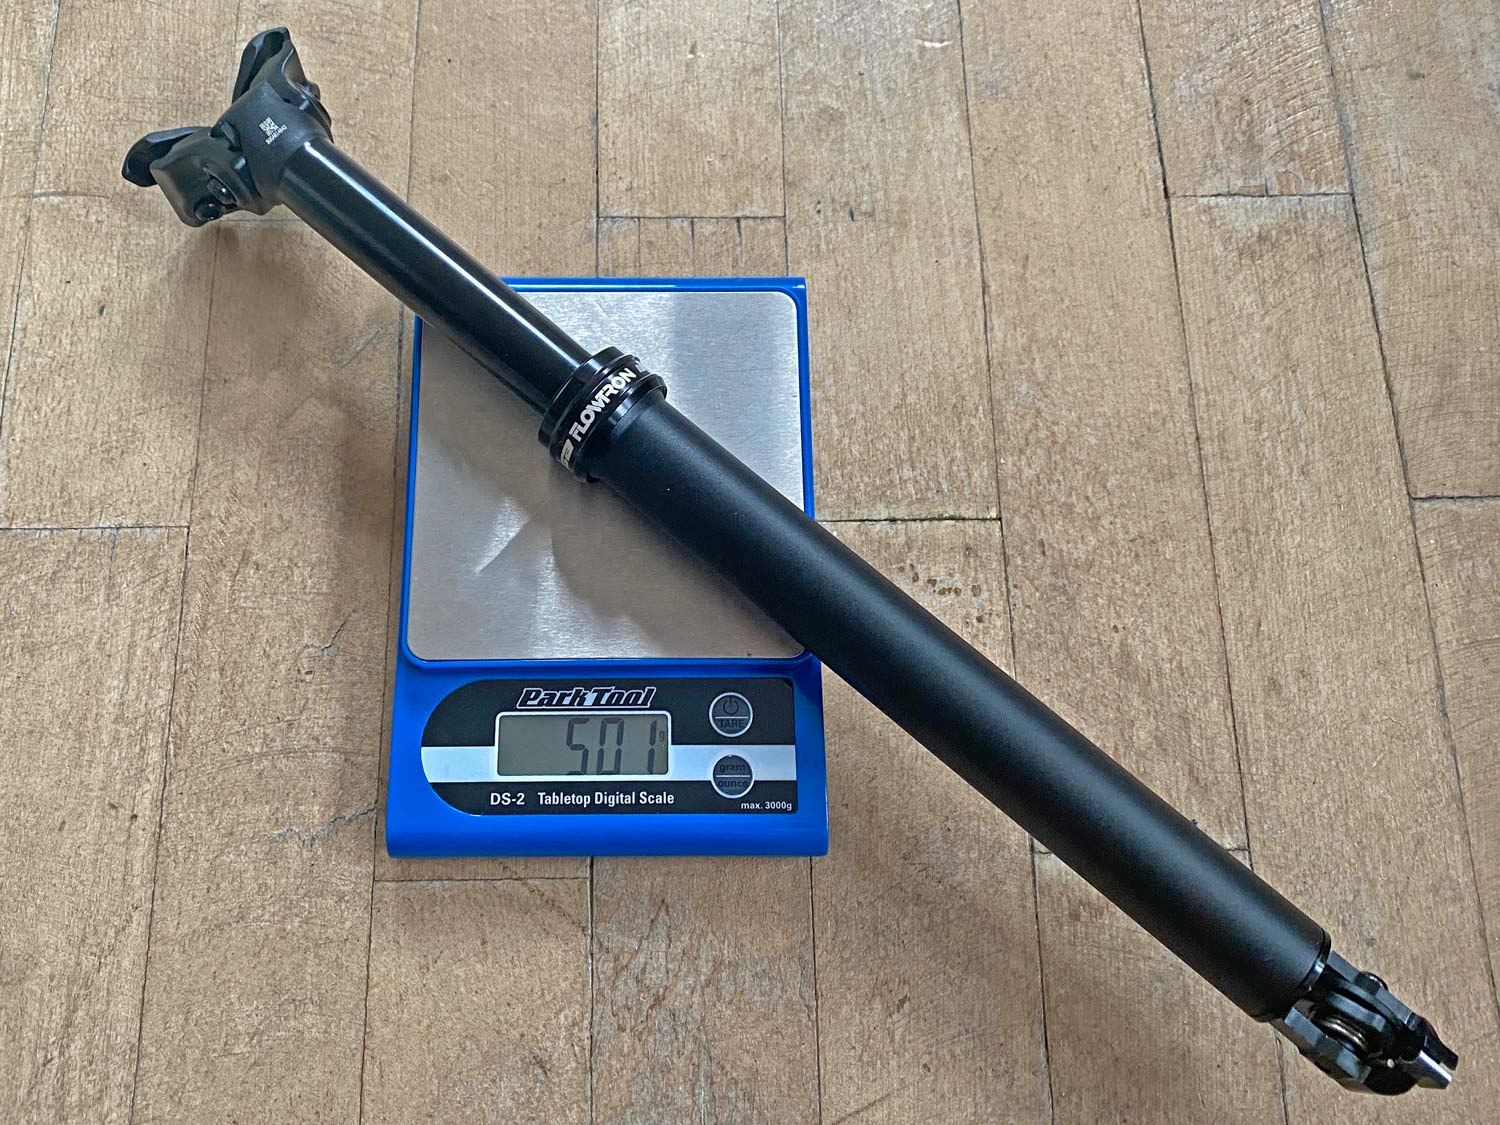 FSA Flowtron AGX gravel dropper post, First Look Review: 27.2mm internally routed dropper seatpost with dropbar remote, 501g dropper actual weight